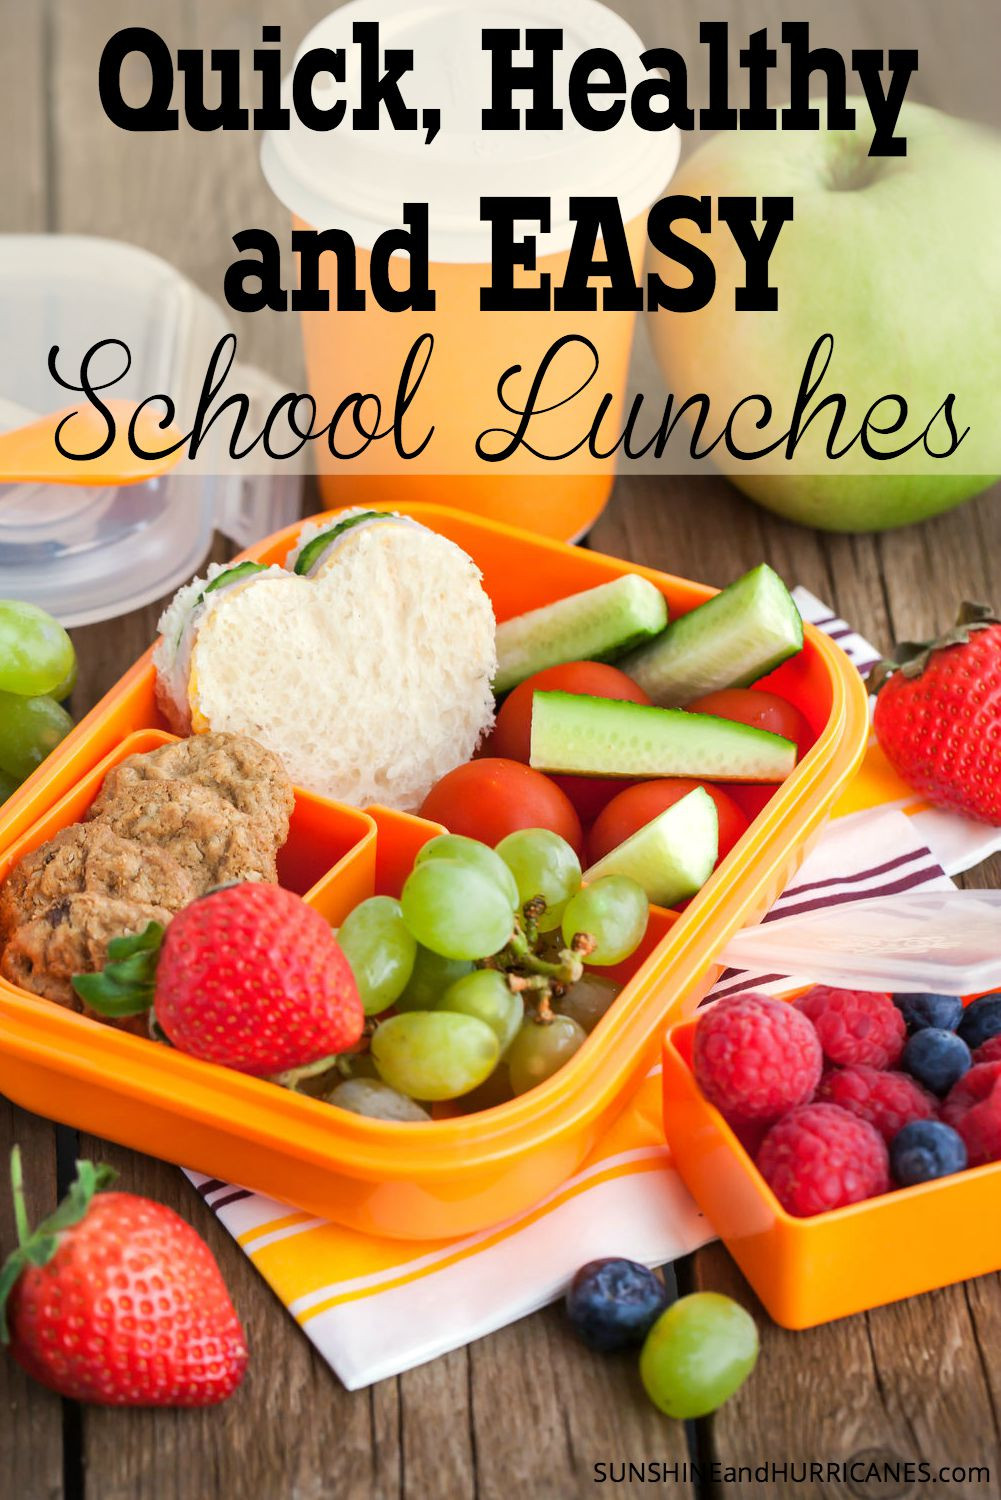 Quick Easy Healthy Lunches
 Healthy Quick and Easy School Lunches